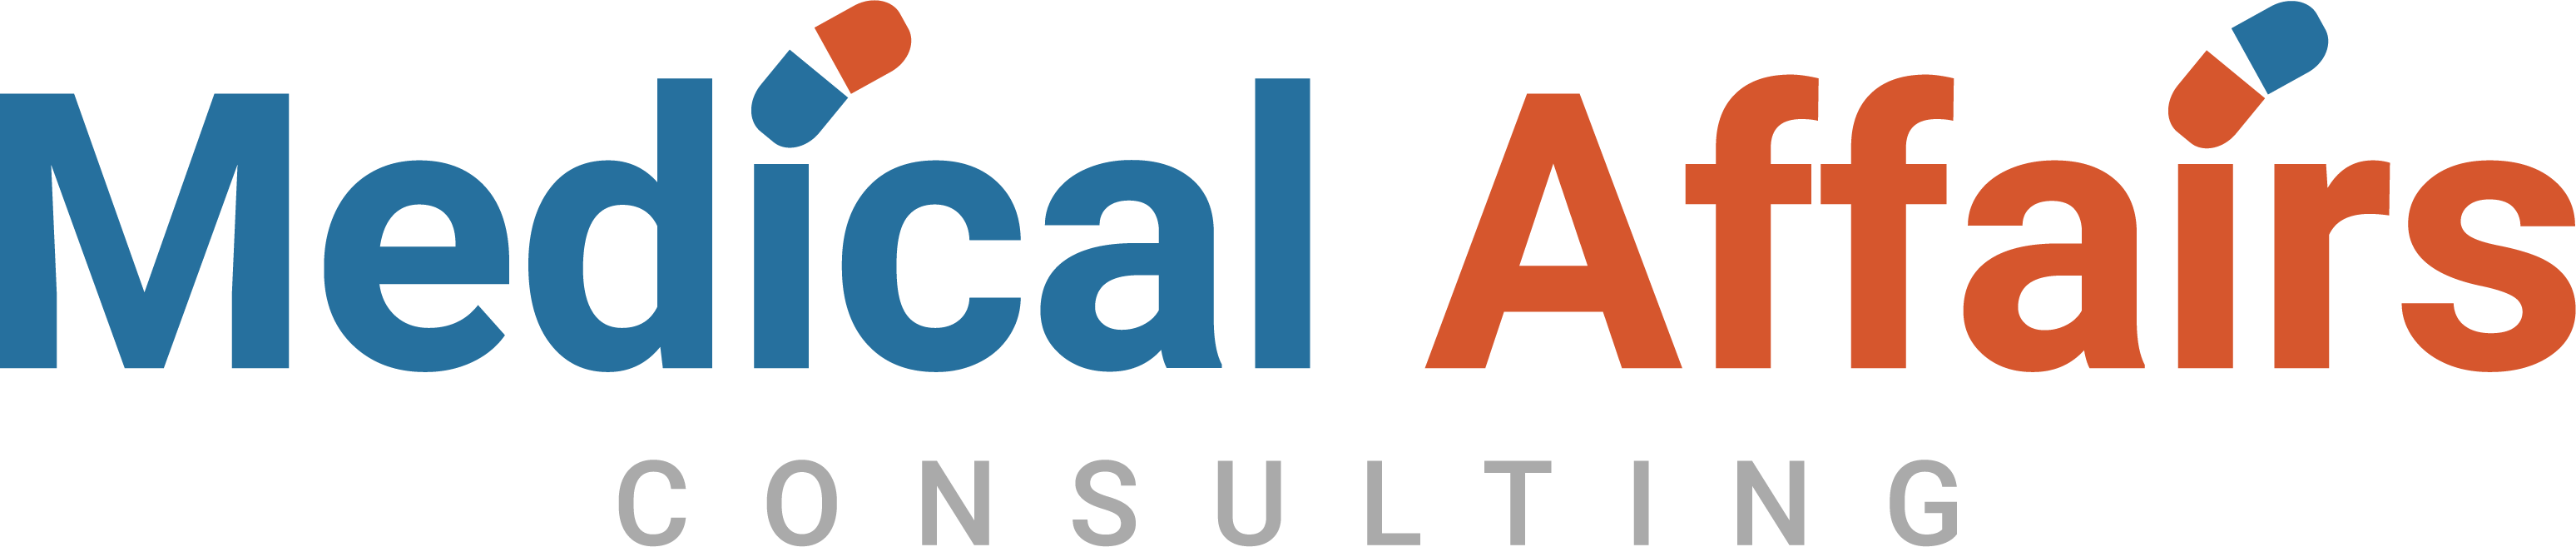 Medical Affairs Consulting